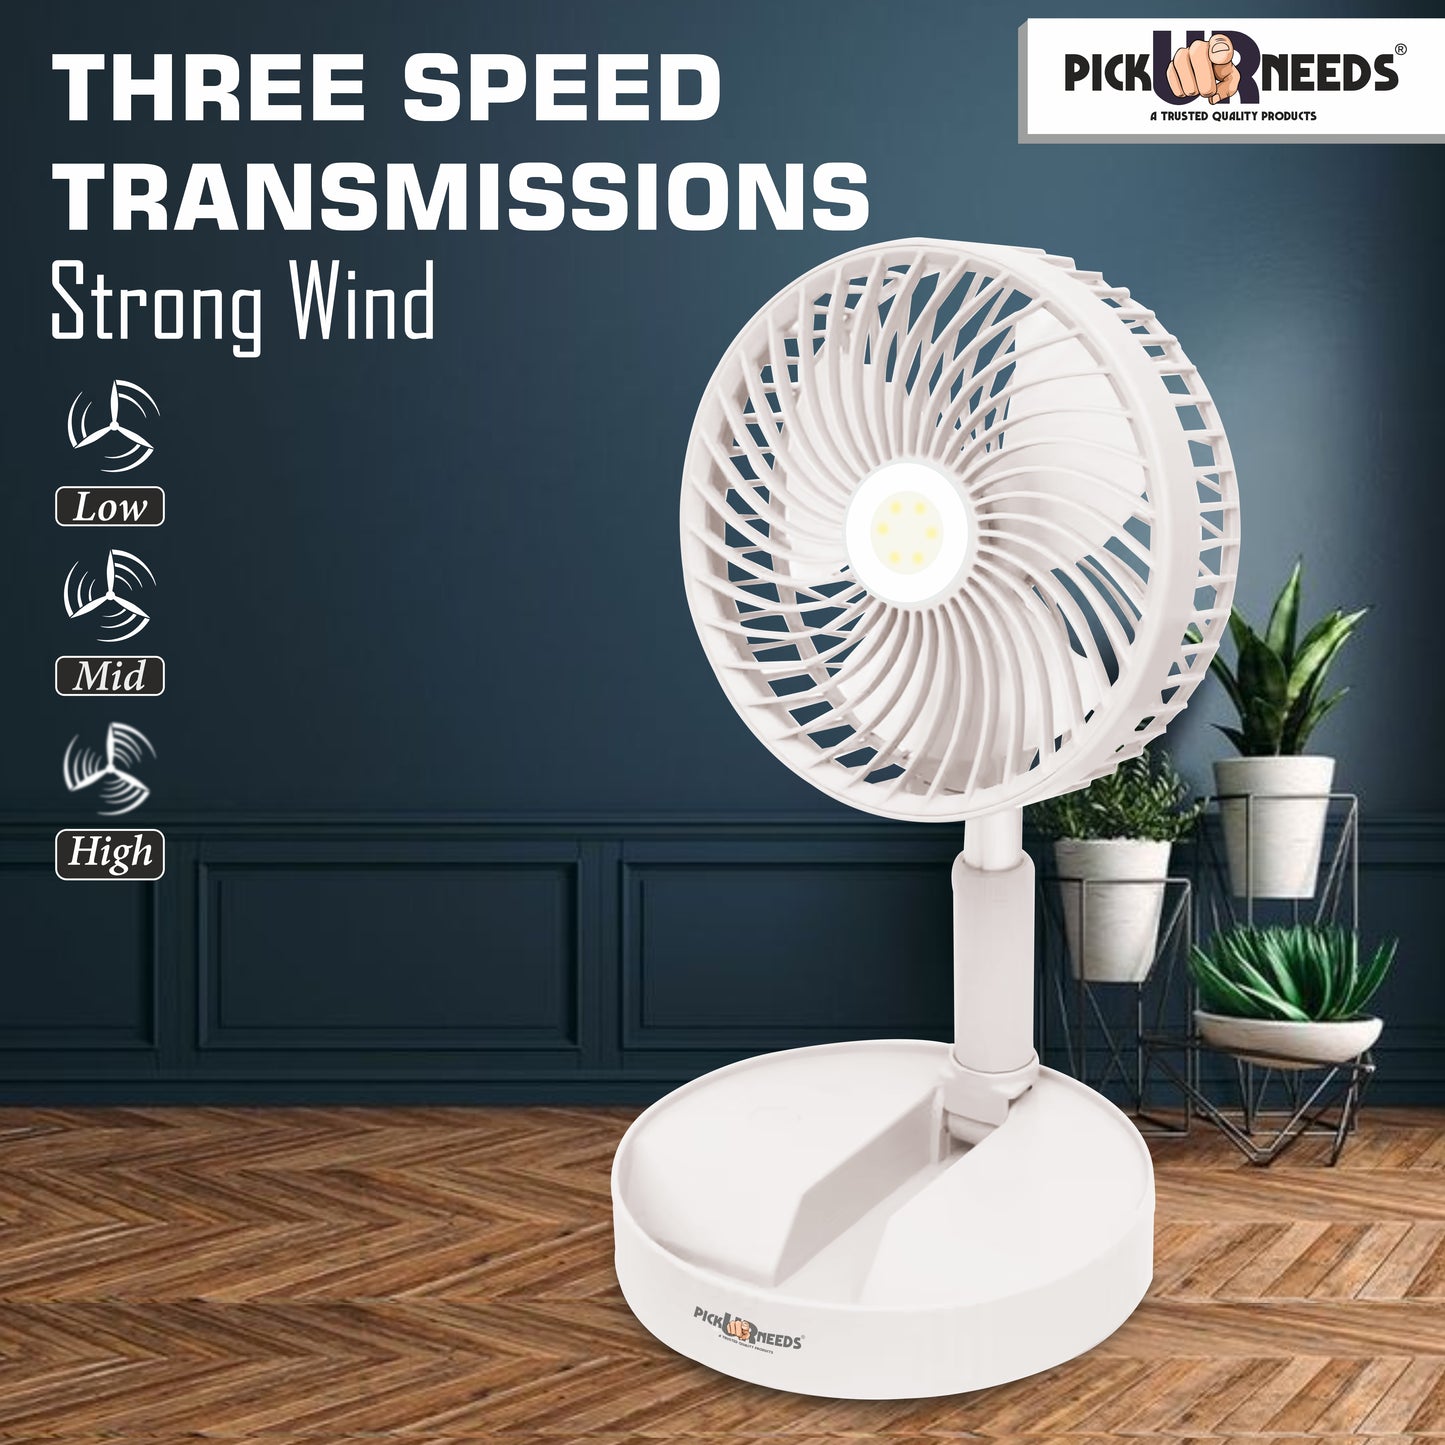 Pick Ur Needs Rechargeable Table Fan 2 Mode LED 3 Type Speed Foldable Design 3 mm Energy Saving 3 Blade Table Fan (Pink, Pack of 1)